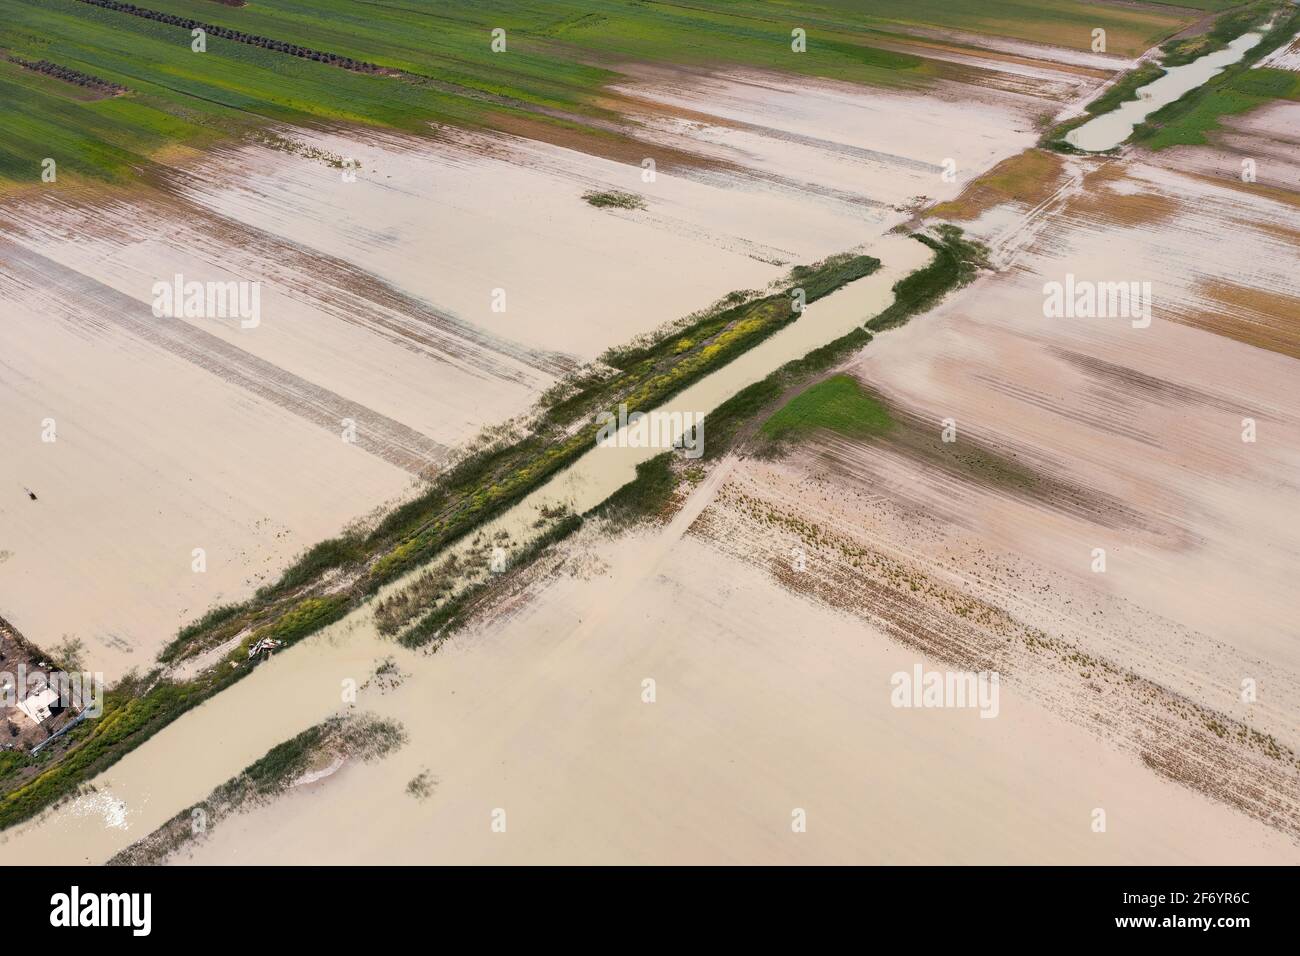 Flooded agricultural fields due to heavy rains, Aerial view. Stock Photo